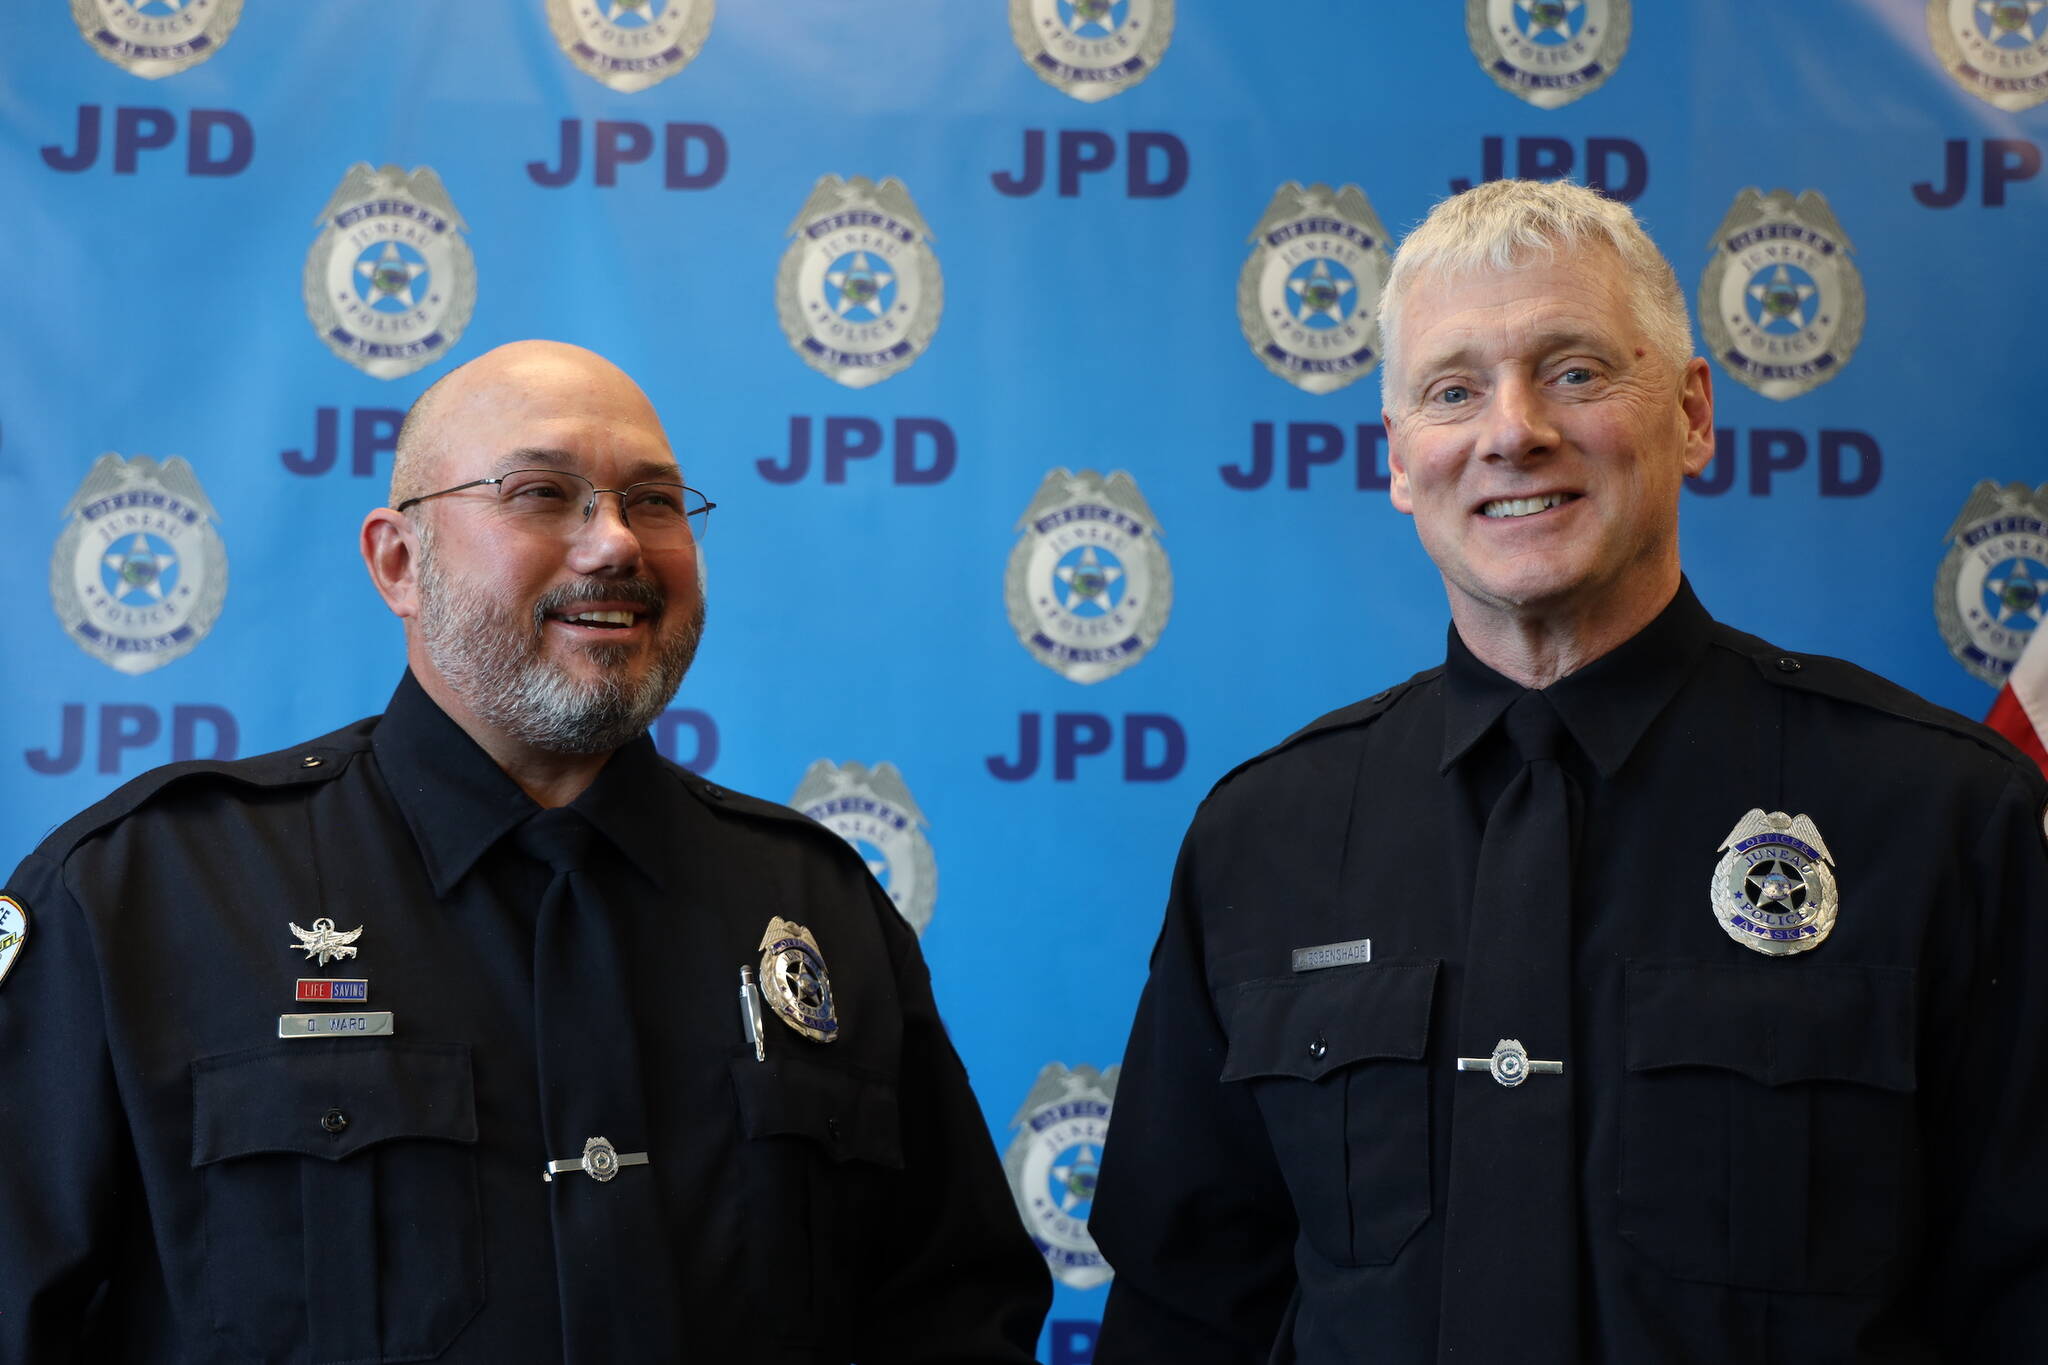 Retiring Juneau Police Department Officers Don Ward (left) and Jim Esbenshade (right) smile for a picture at their joint retirement ceremony on Tuesday afternoon at the Juneau Police Station. (Clarise Larson / Juneau Empire)